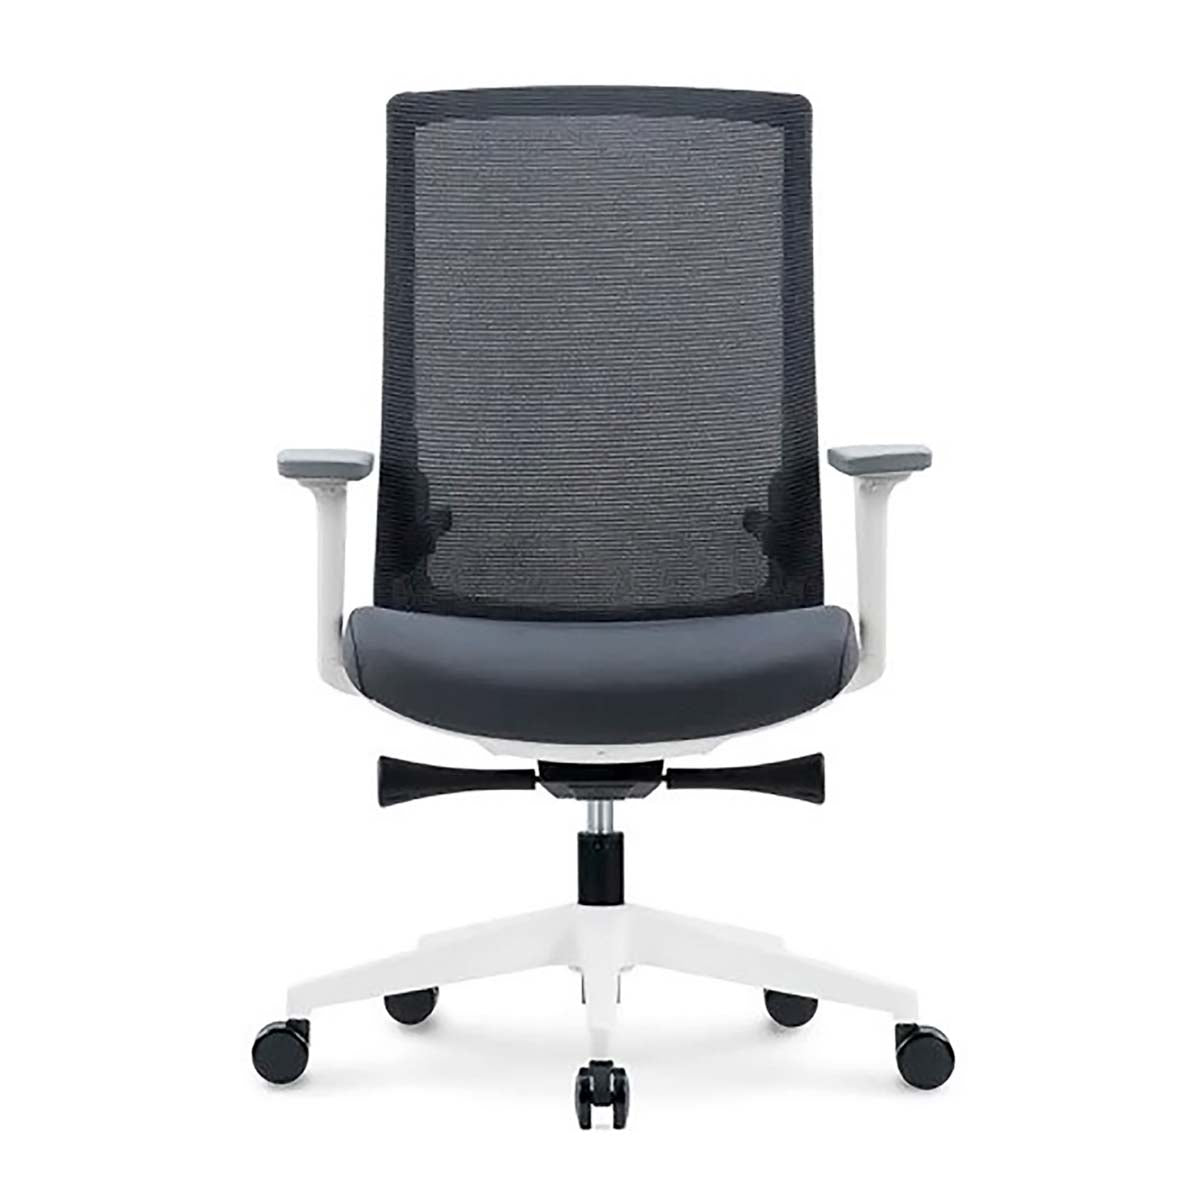 Product - Office Chairs and Seating - Mesh Chairs - Page 1 - COE  Distributing